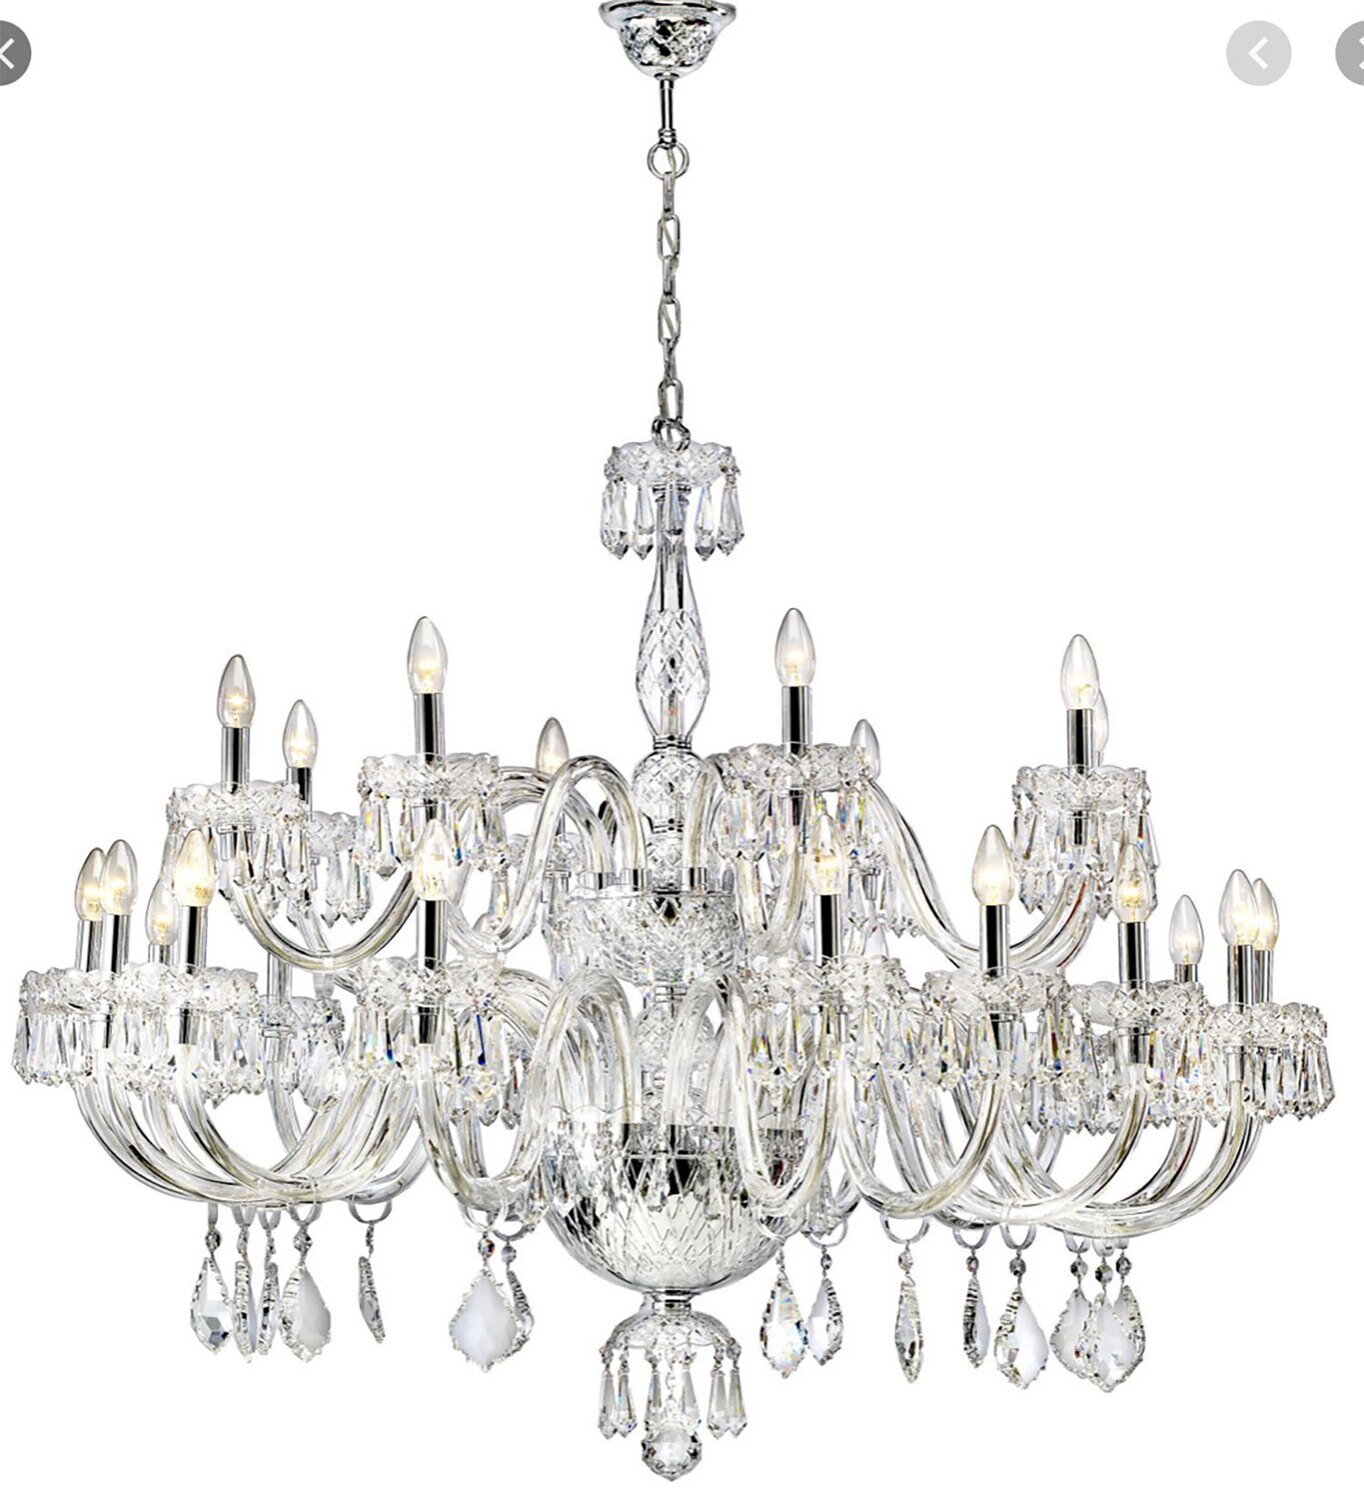 Vista Alegre Diamond Chandelier With 2 Levels and 18 Arms 48000864